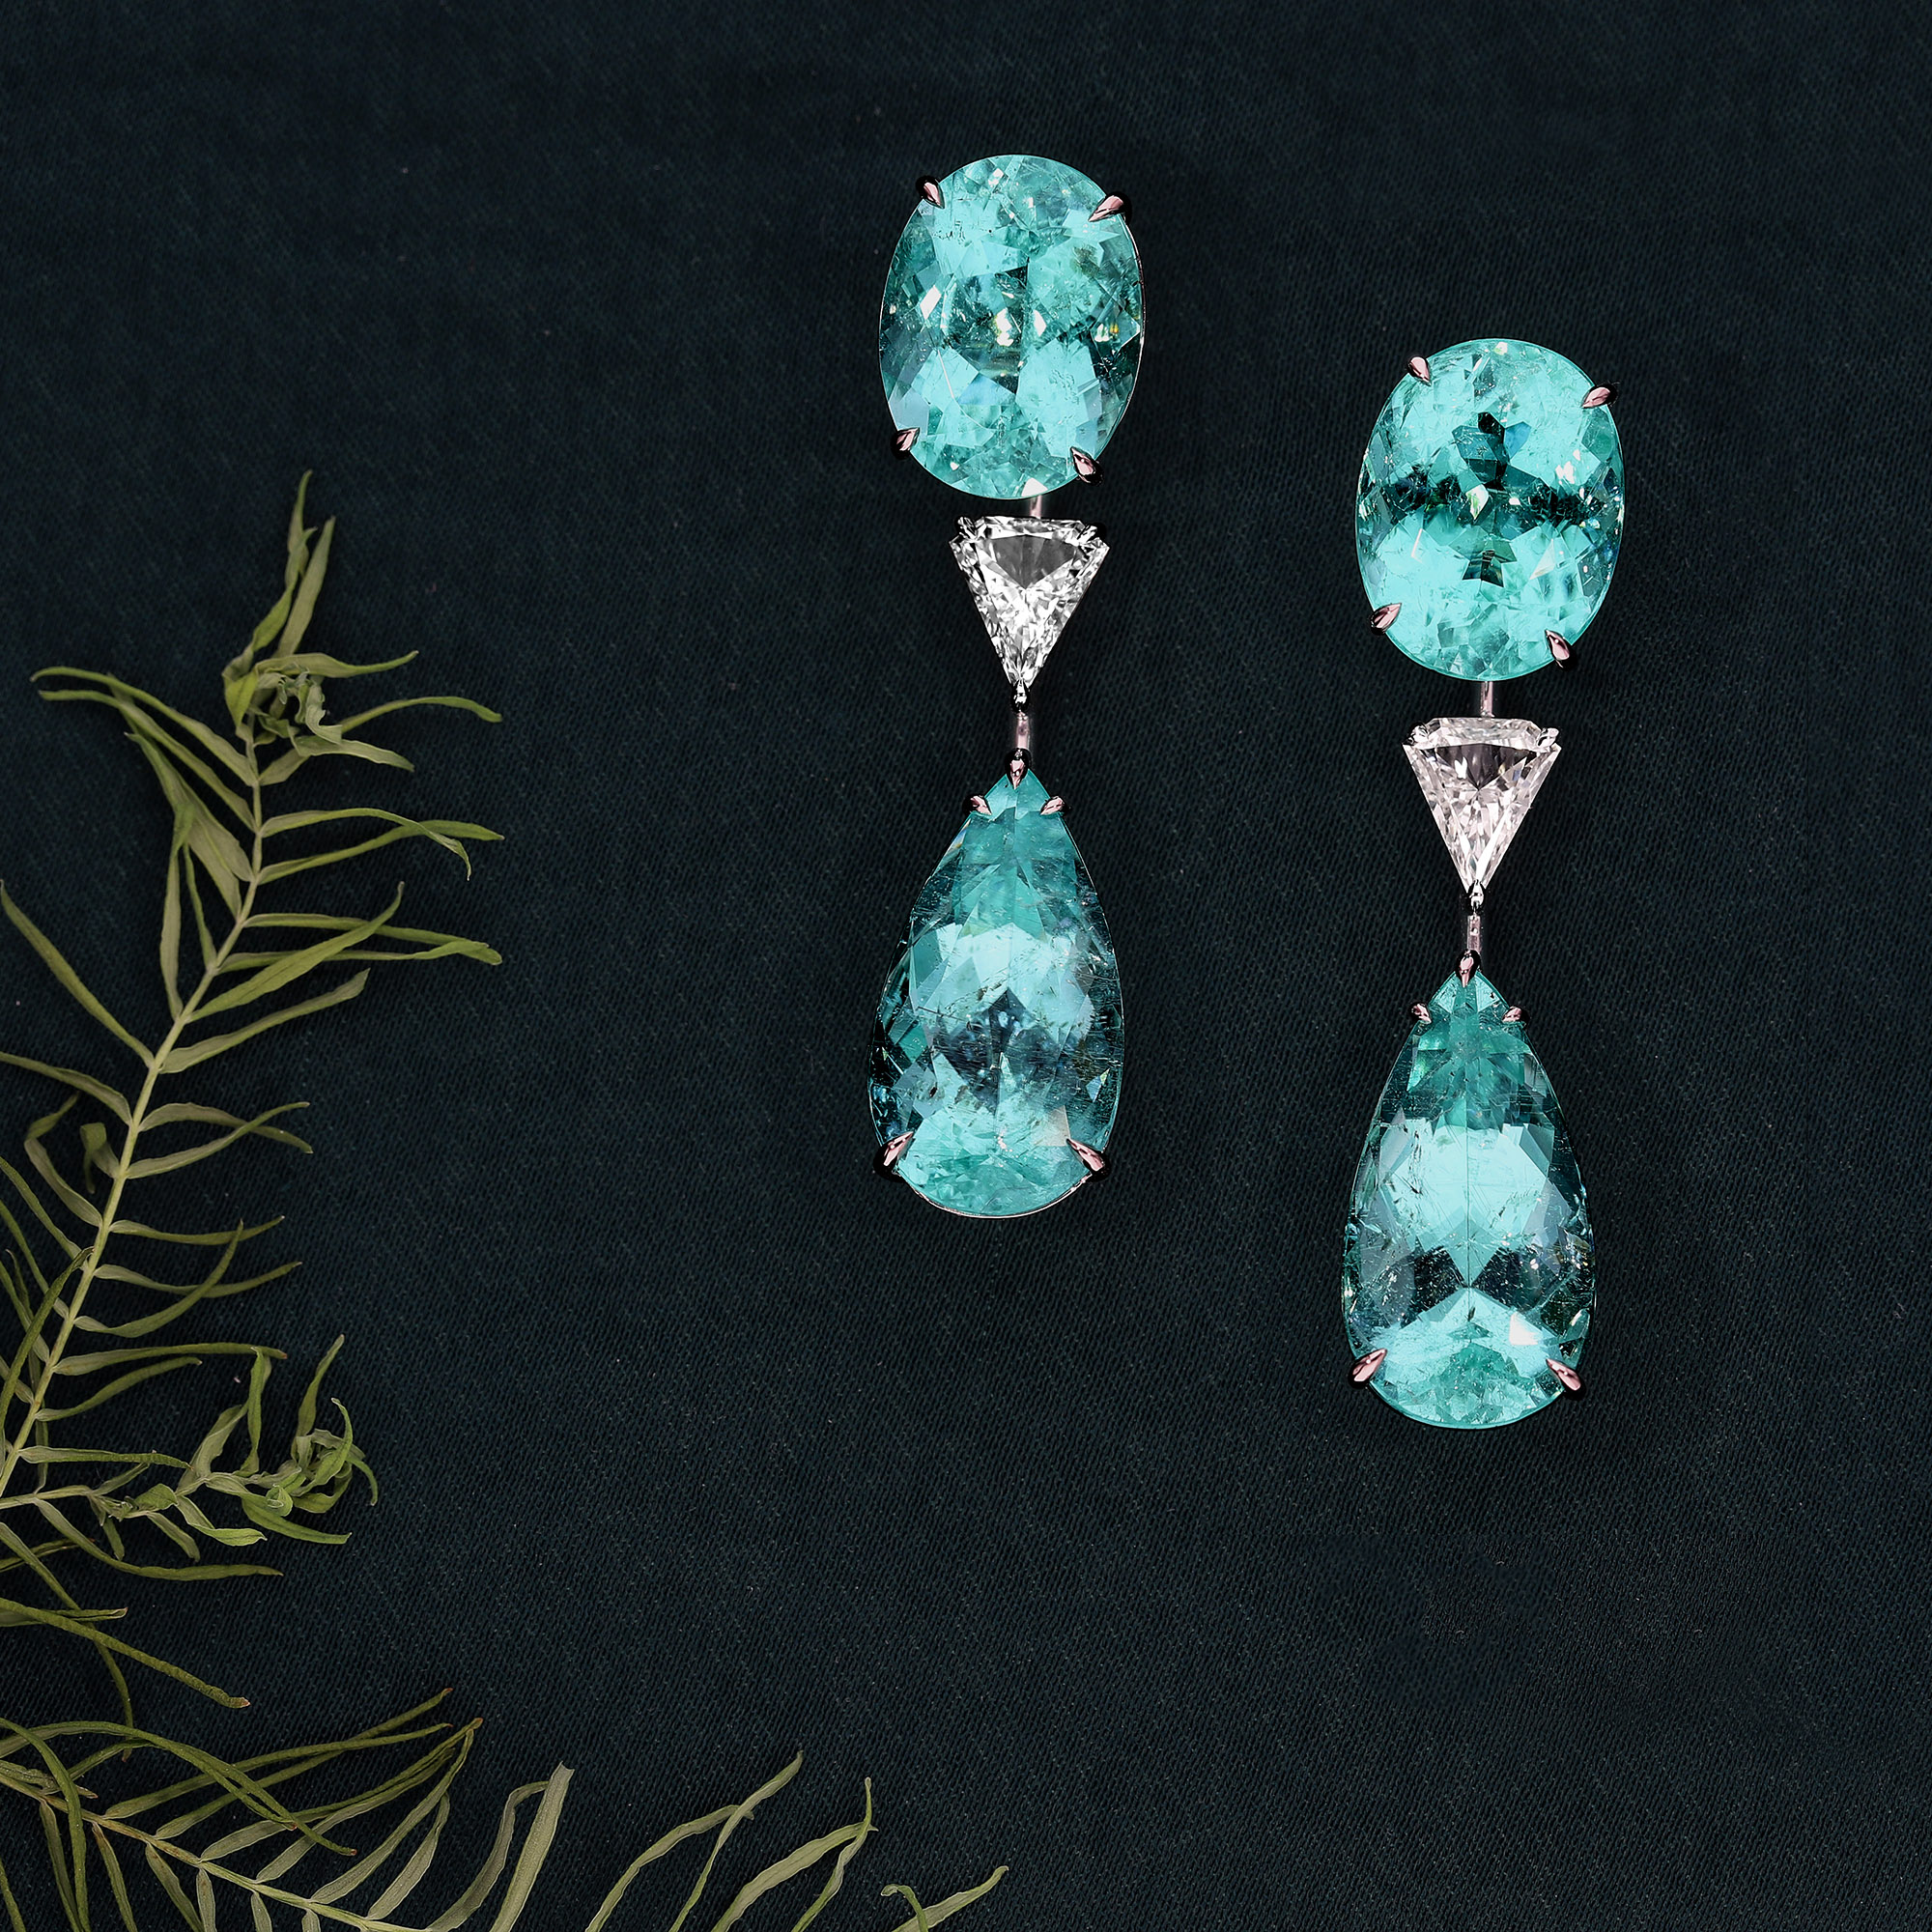 Paraiba Tourmalines – enigmatic and electrifying